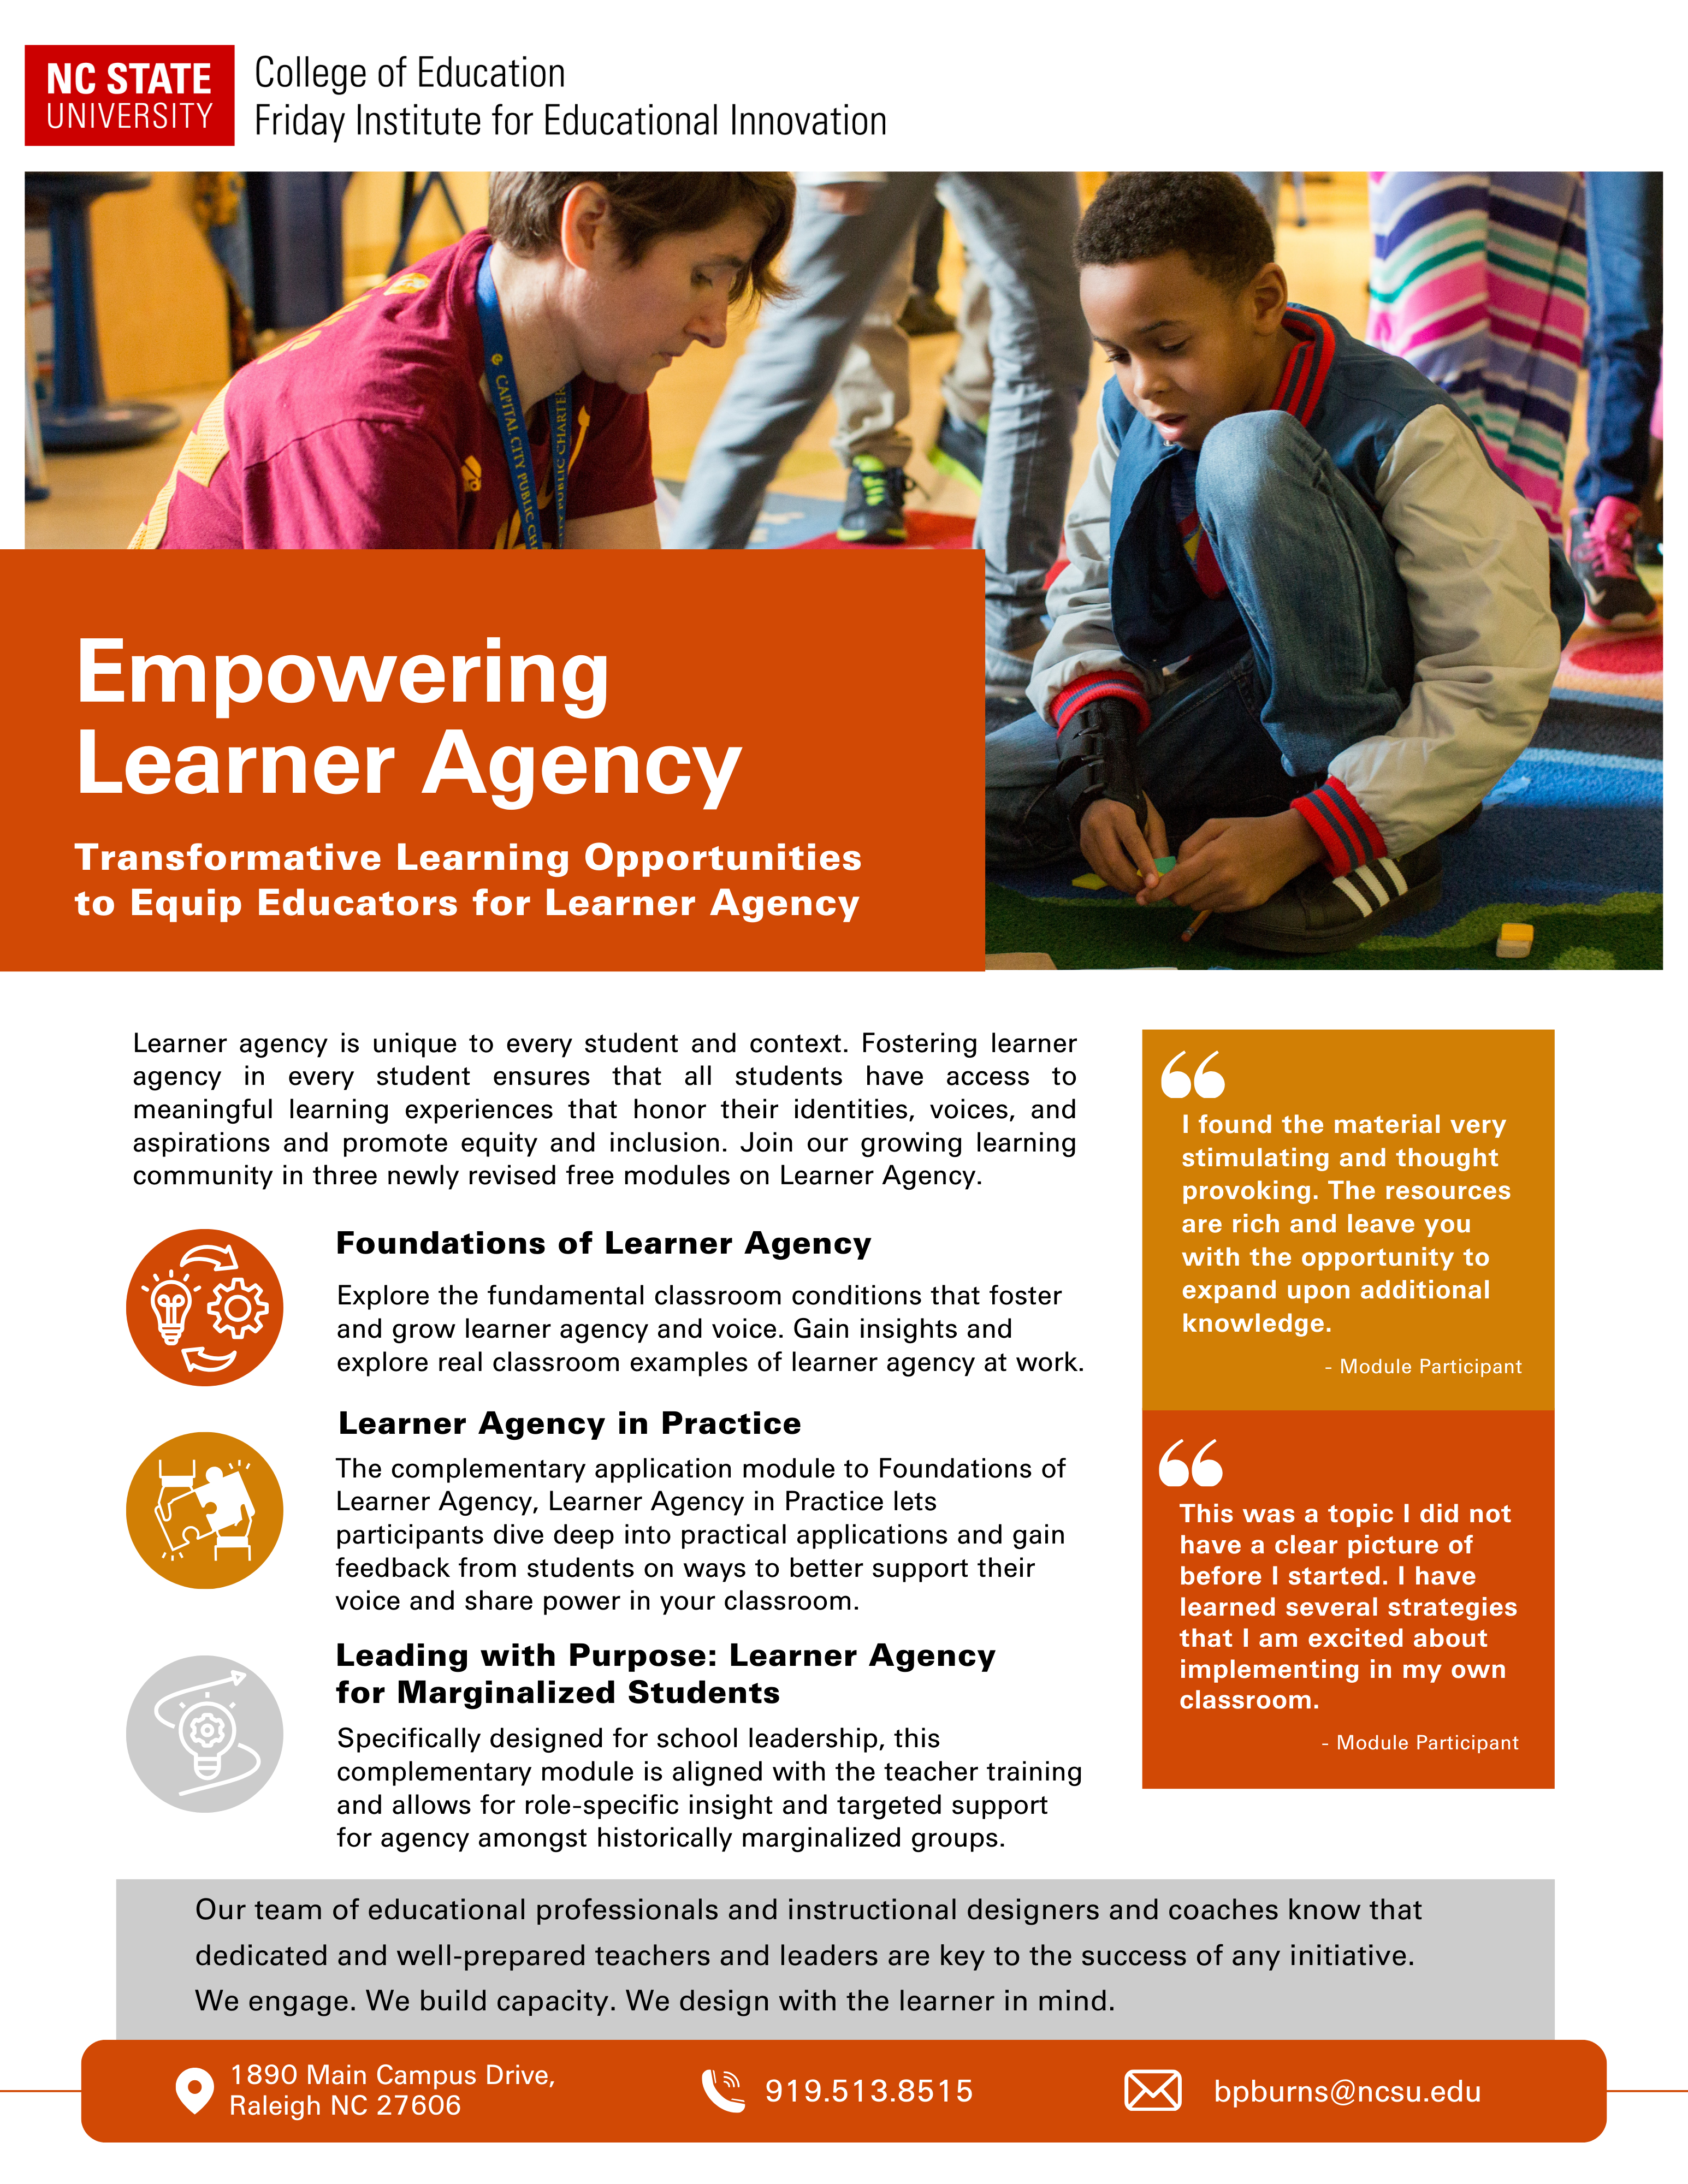 Empowering Learner Agency handout featuring key features: foundations of learner agency, learner agency in practice and leading with purpose: learner agency for marginalized students